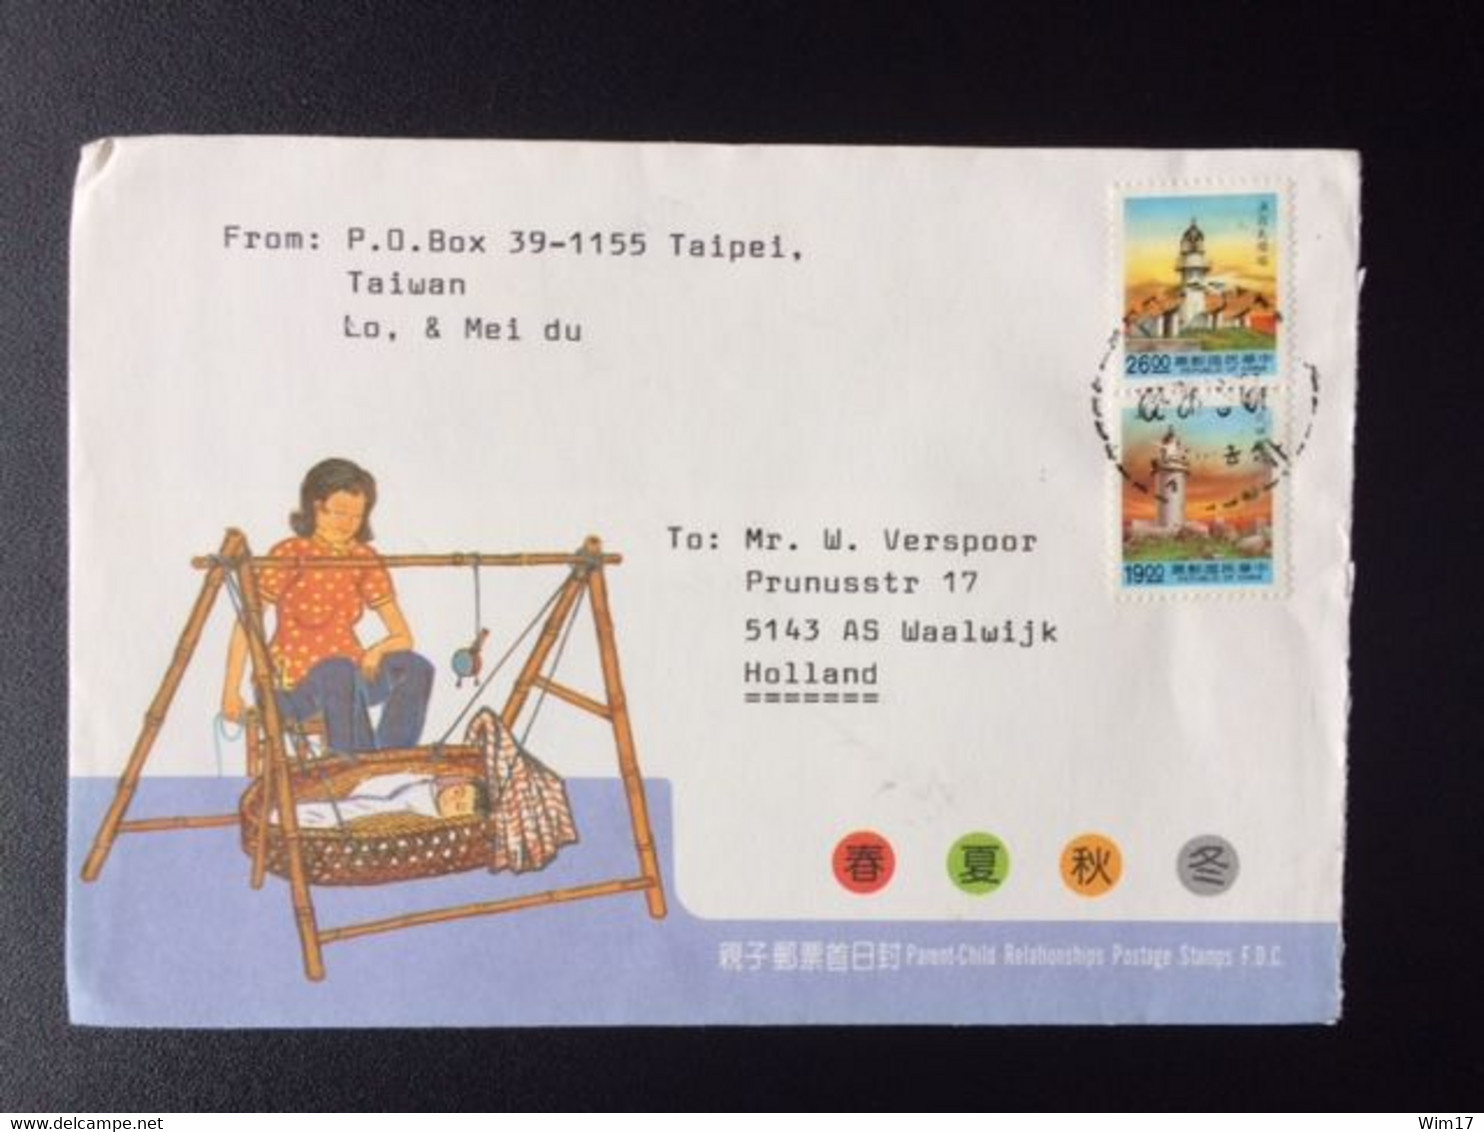 TAIWAN 1985 AIR MAIL LETTER LIGHTHOUSE - Postal Stationery